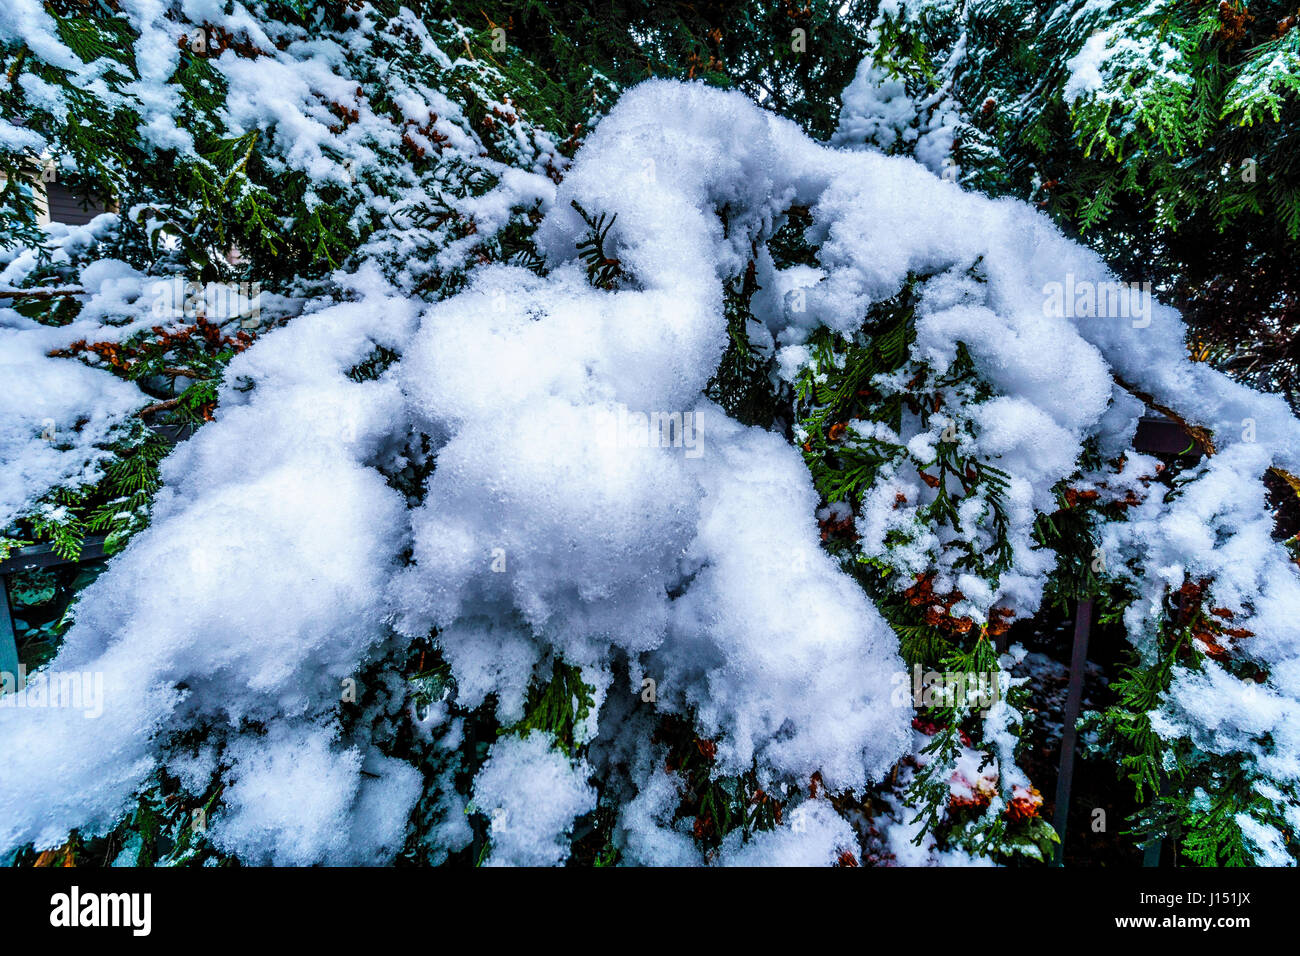 Winter scene with snow covered trees in a back yard in the Fraser Valley, British Columbia, Canada Stock Photo